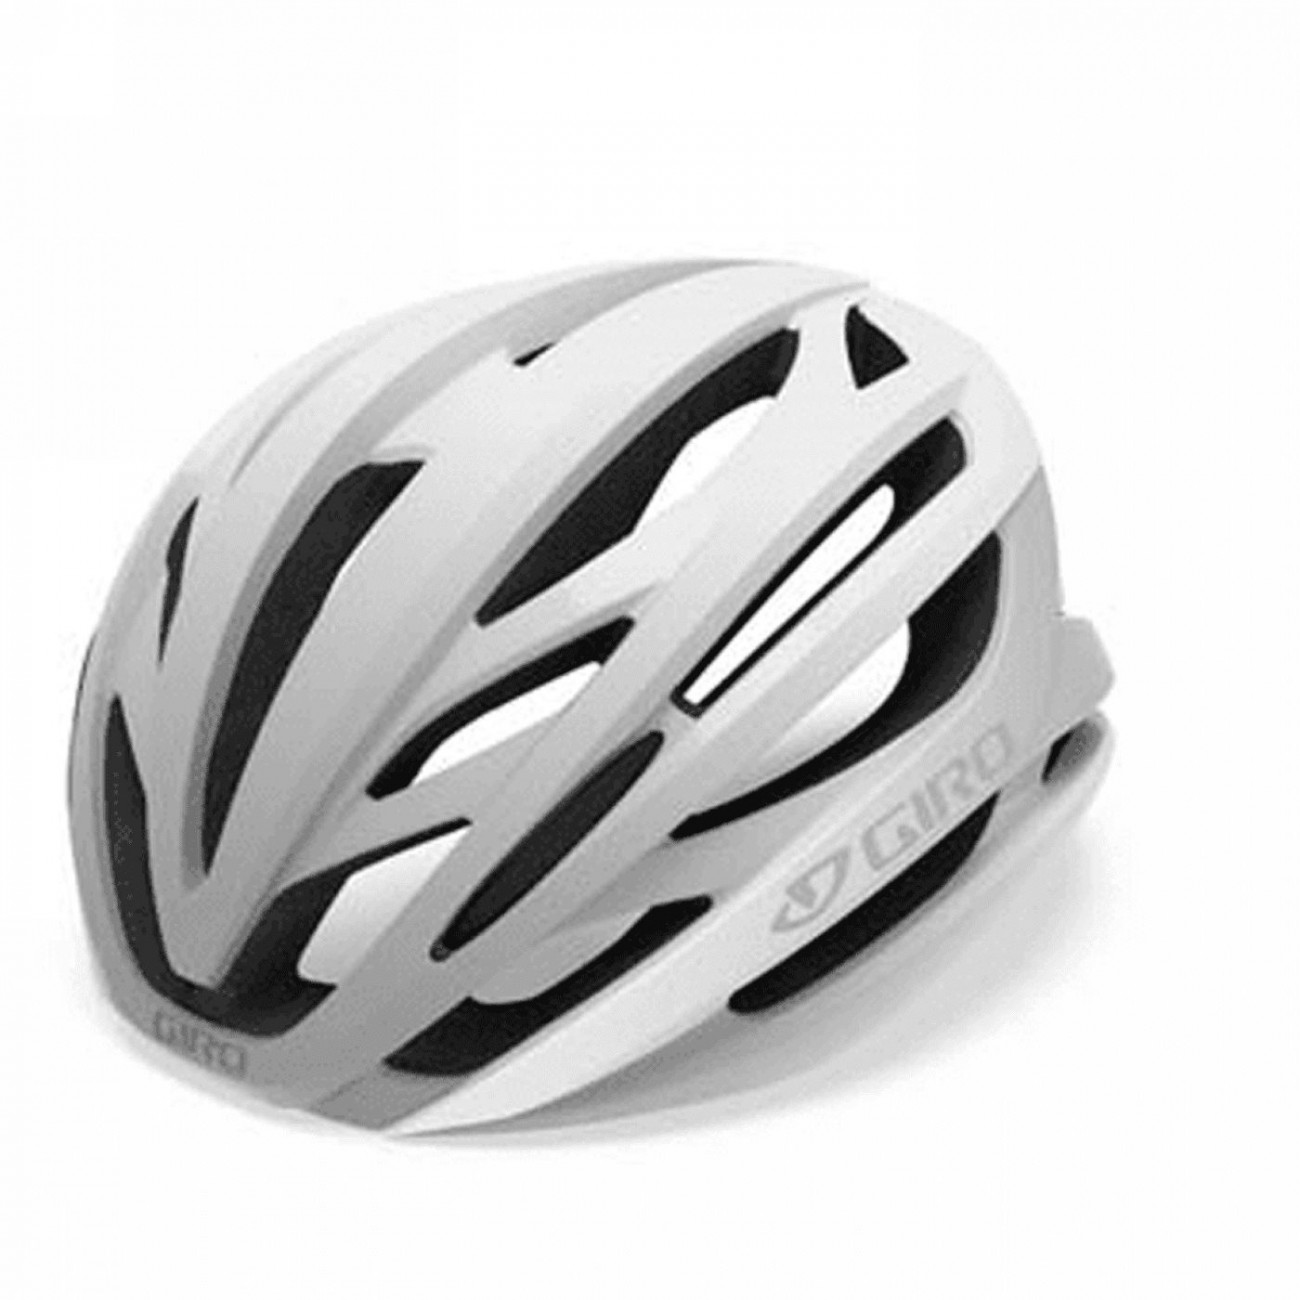 Casque syntaxe mips blanc/argent taille 59/63cm - 1